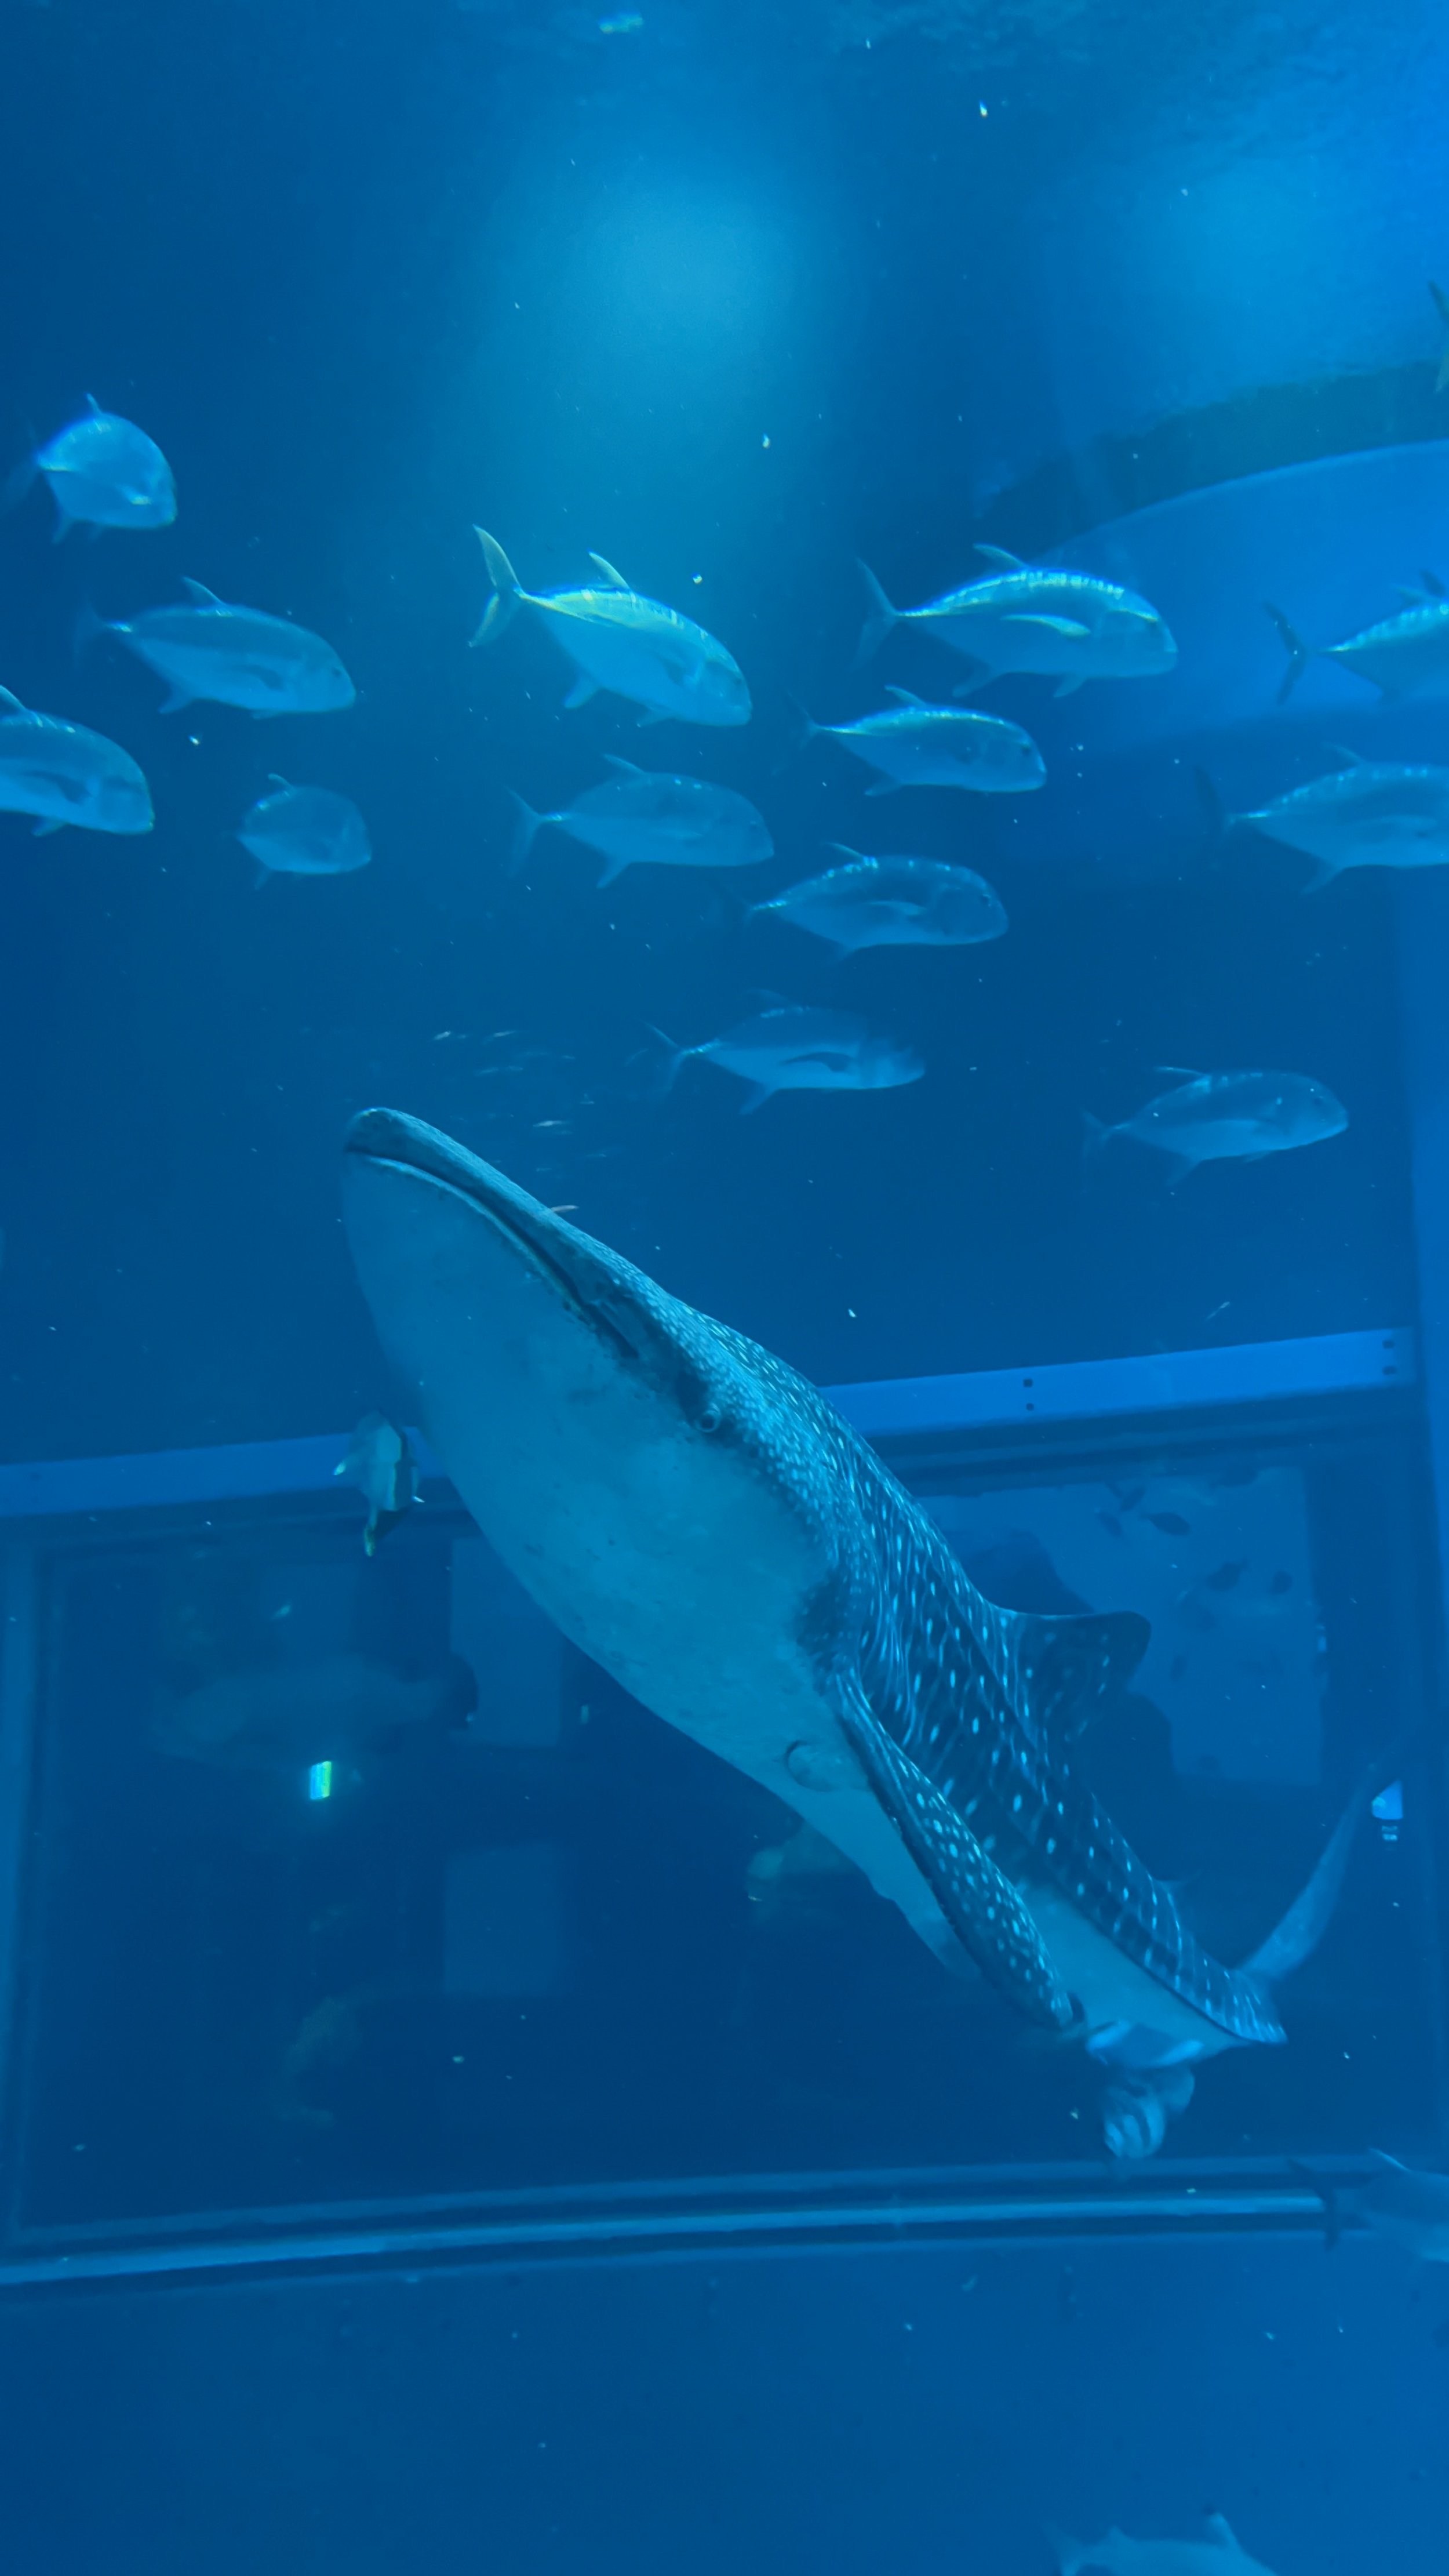  Whale shark swimming with other fish in a giant tank in Osaka Aquarium Kaiyukan 